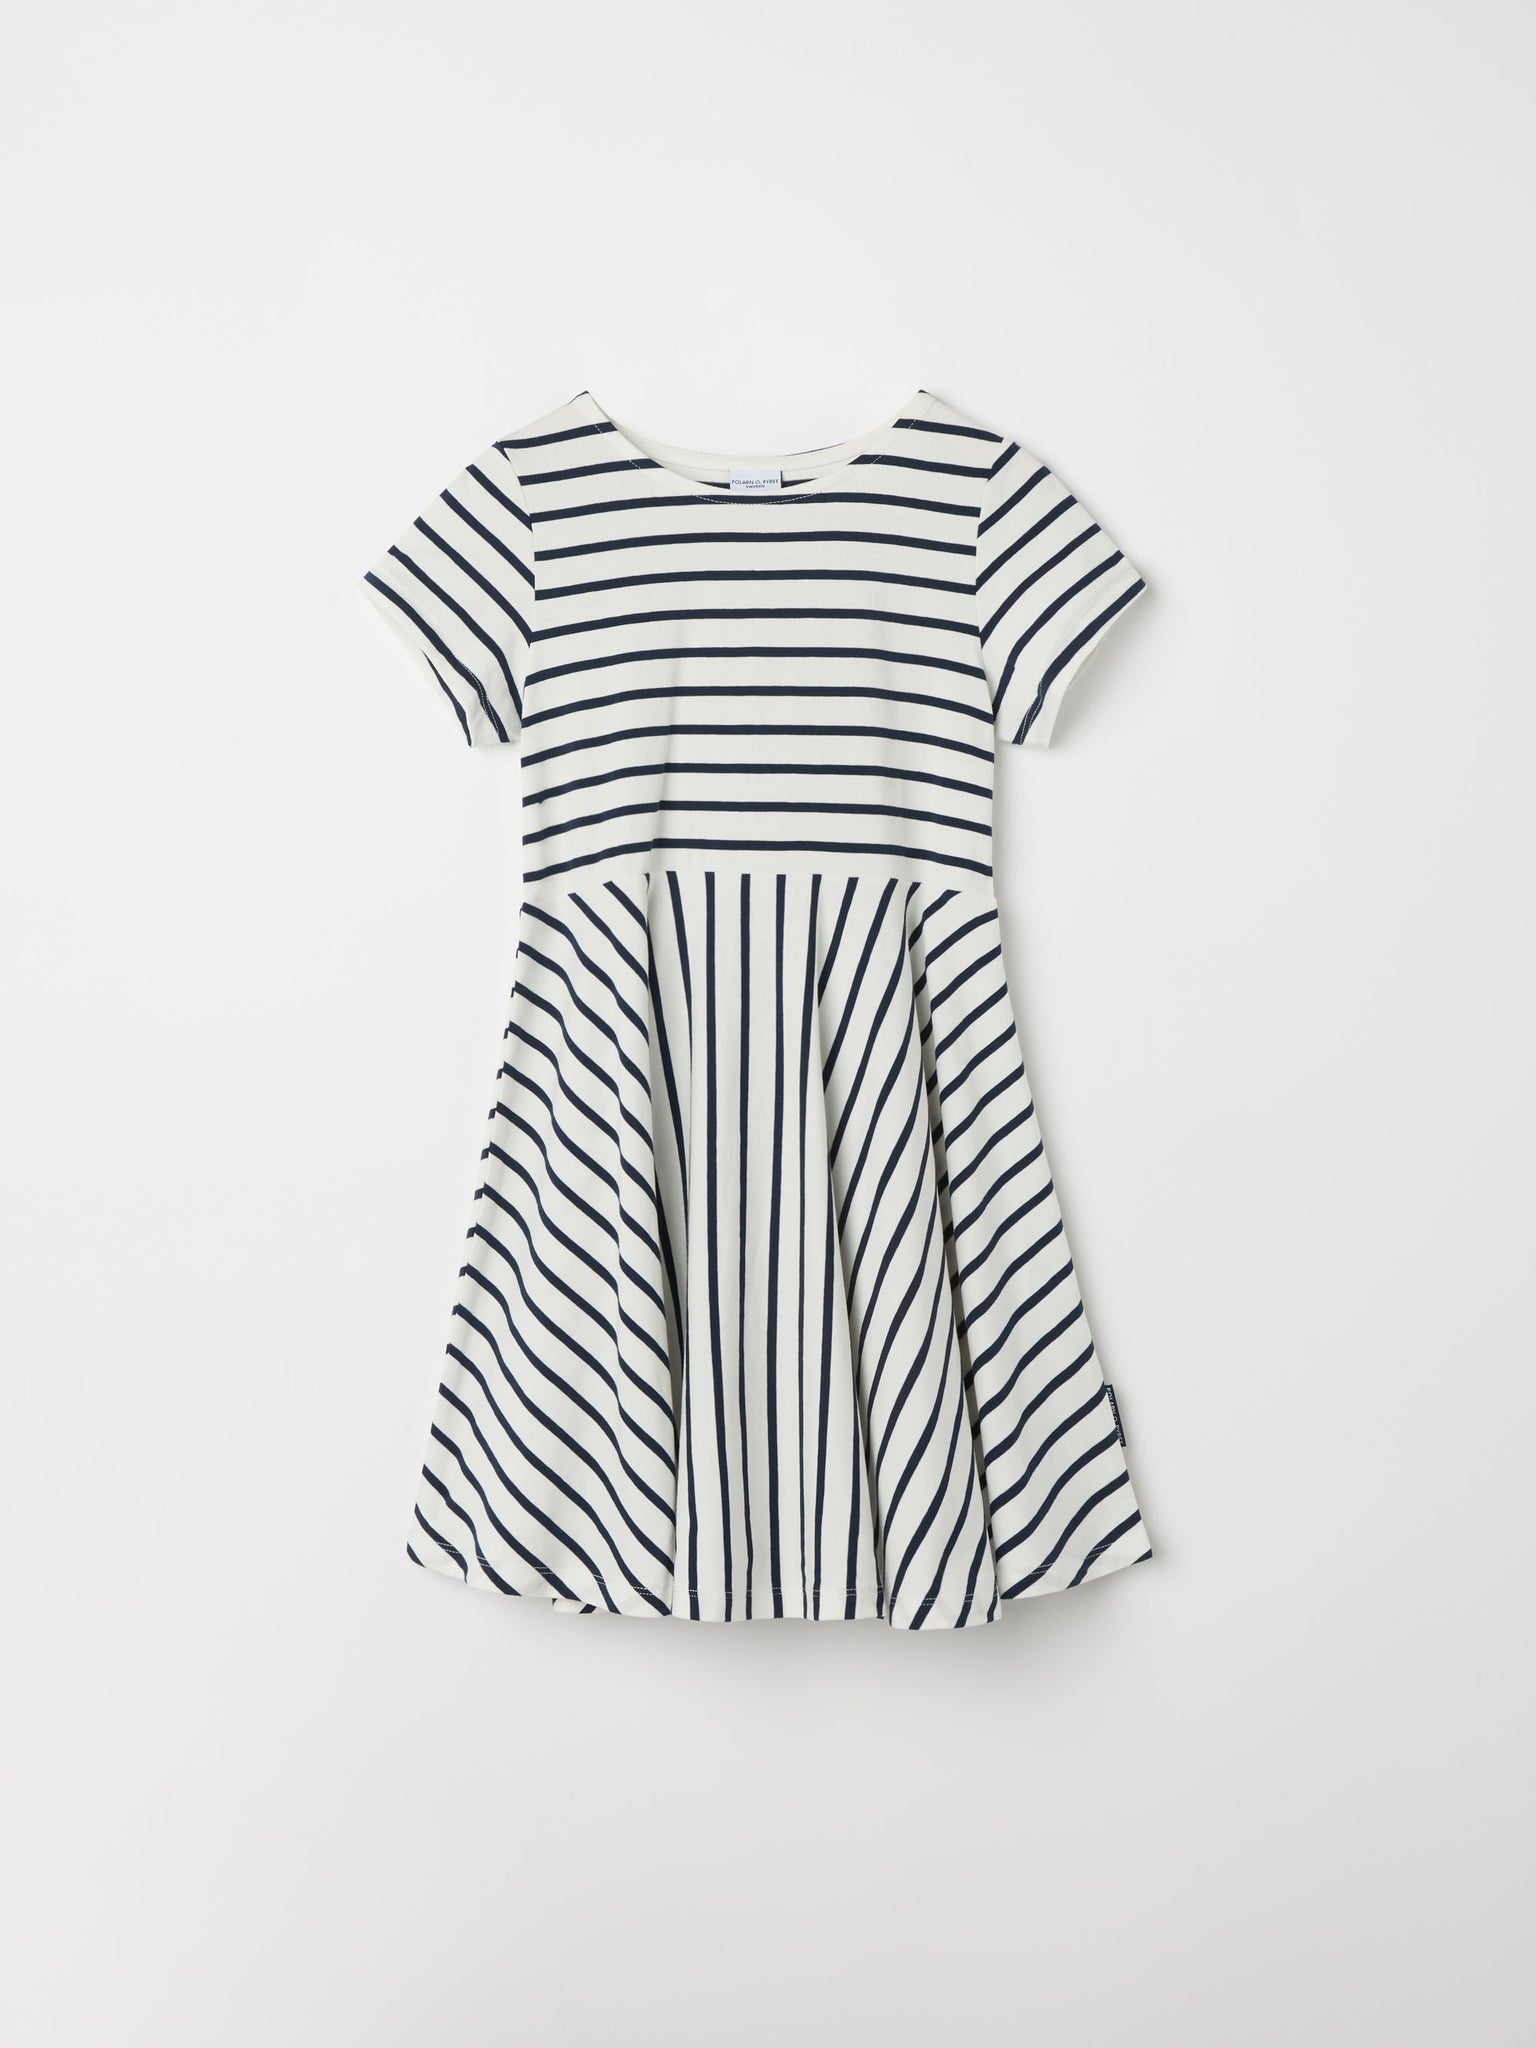 Navy Striped Cotton Kids Dress from the Polarn O. Pyret kidswear collection. Ethically produced kids clothing.